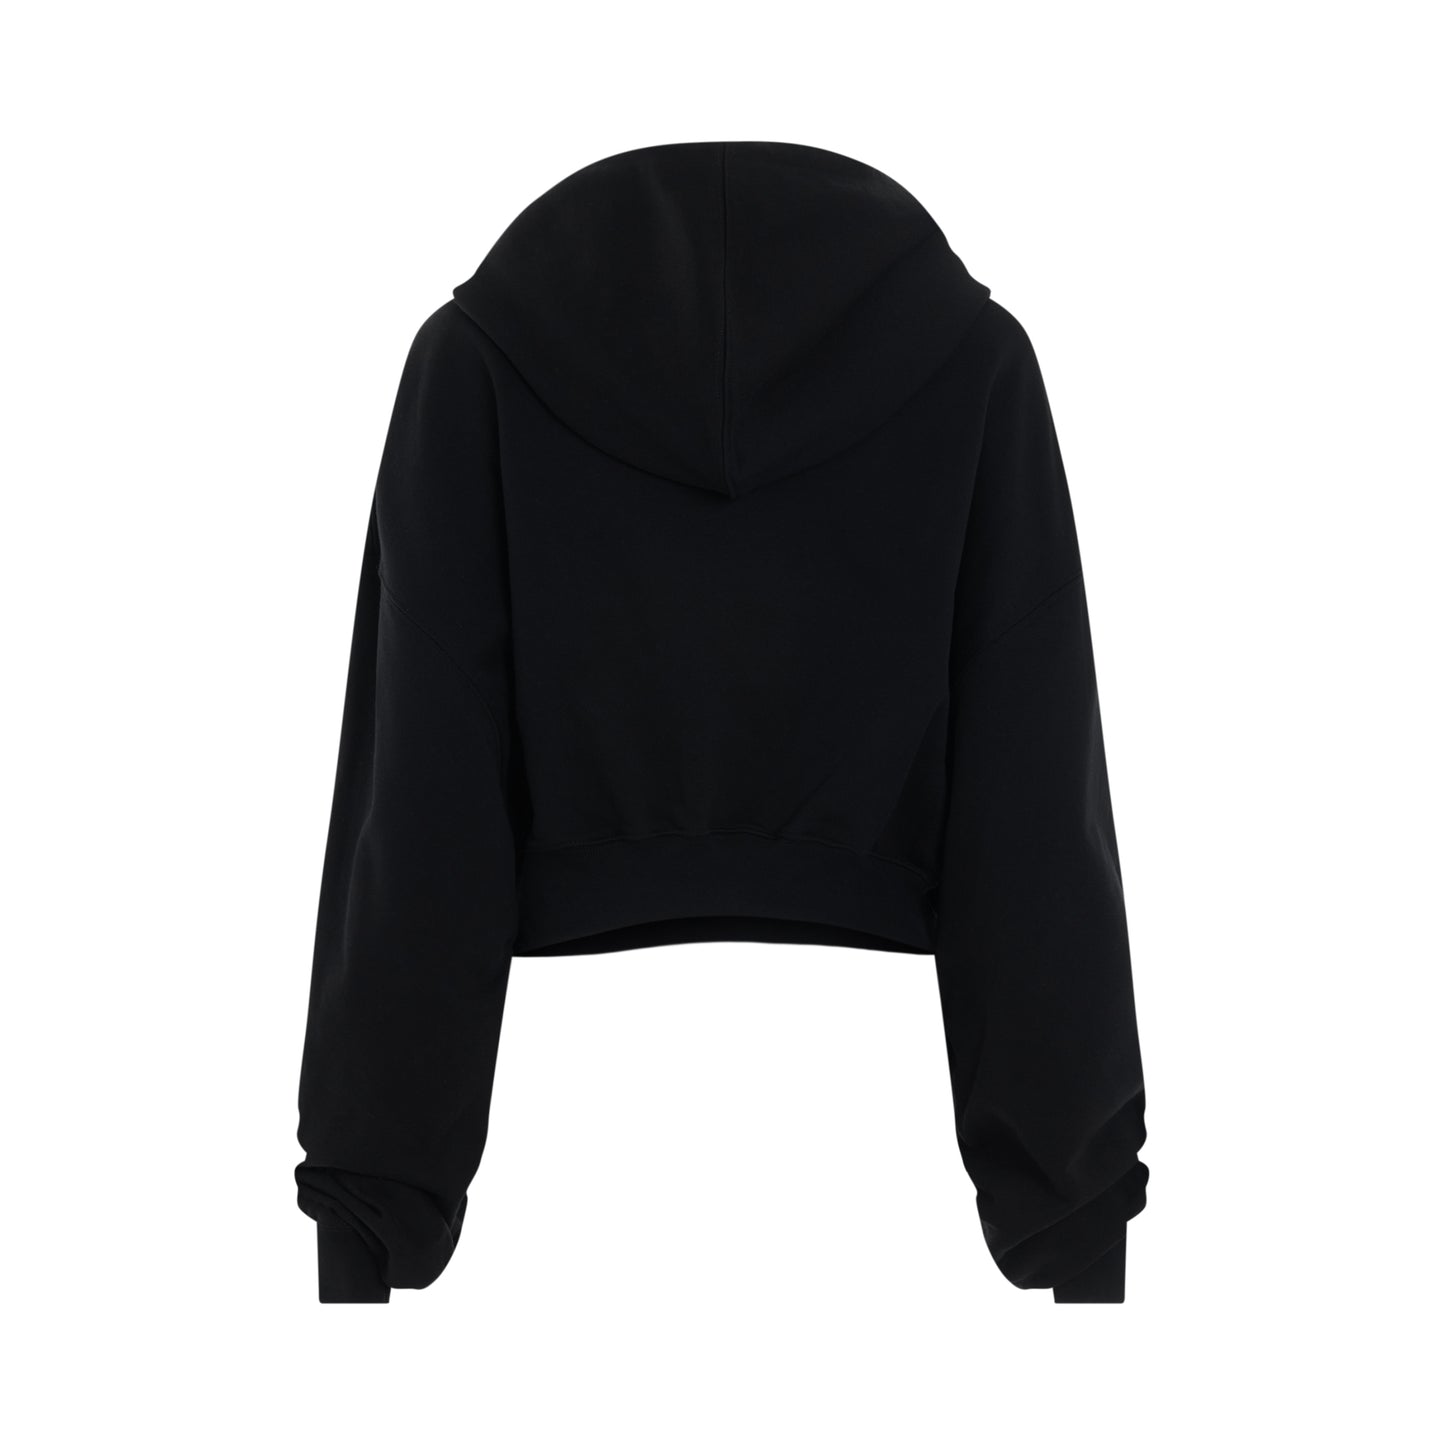 For All Helvetica Crop Oversize Hoodie in Black/White